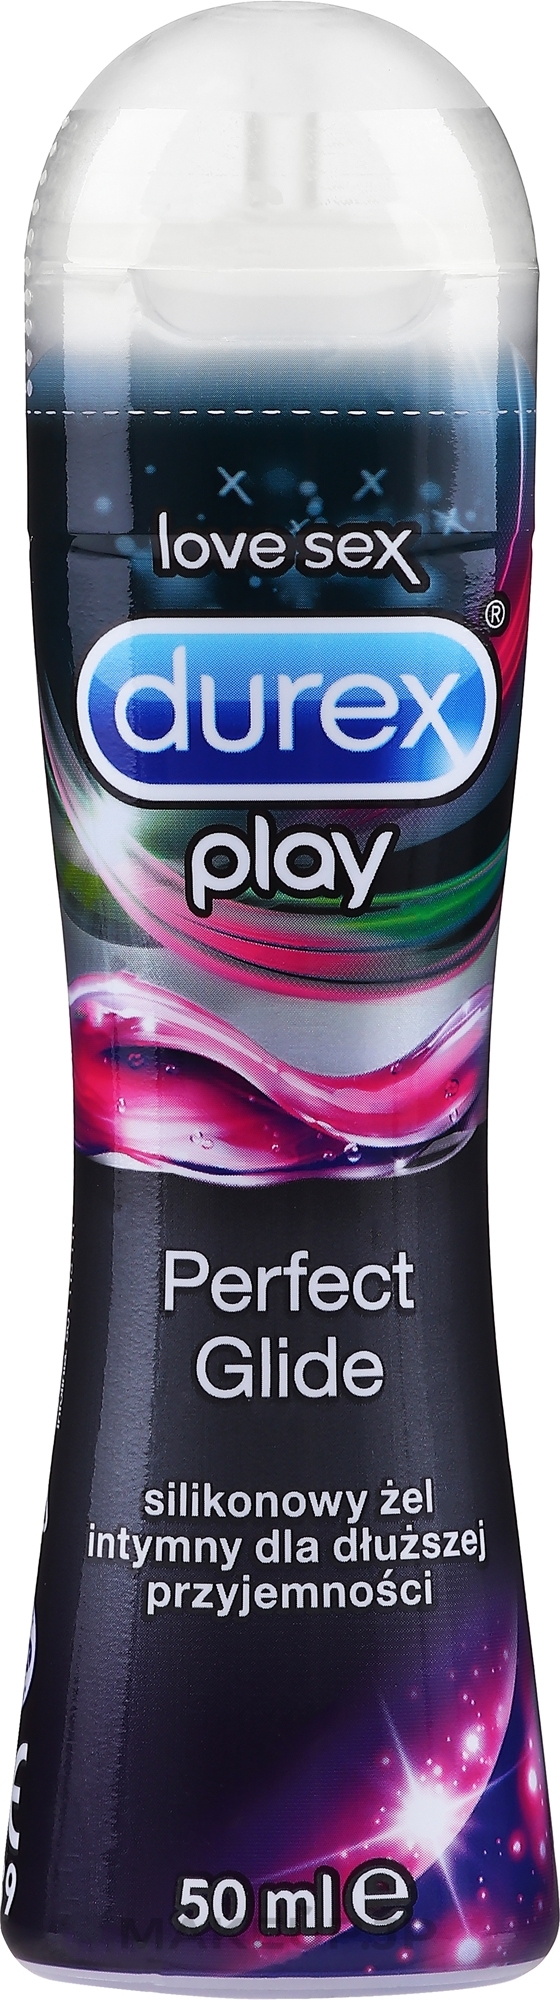 Intimate Gel Lubricant, 50 ml. - Durex Play Perfect Glide Silicone Lube  — photo 50 ml